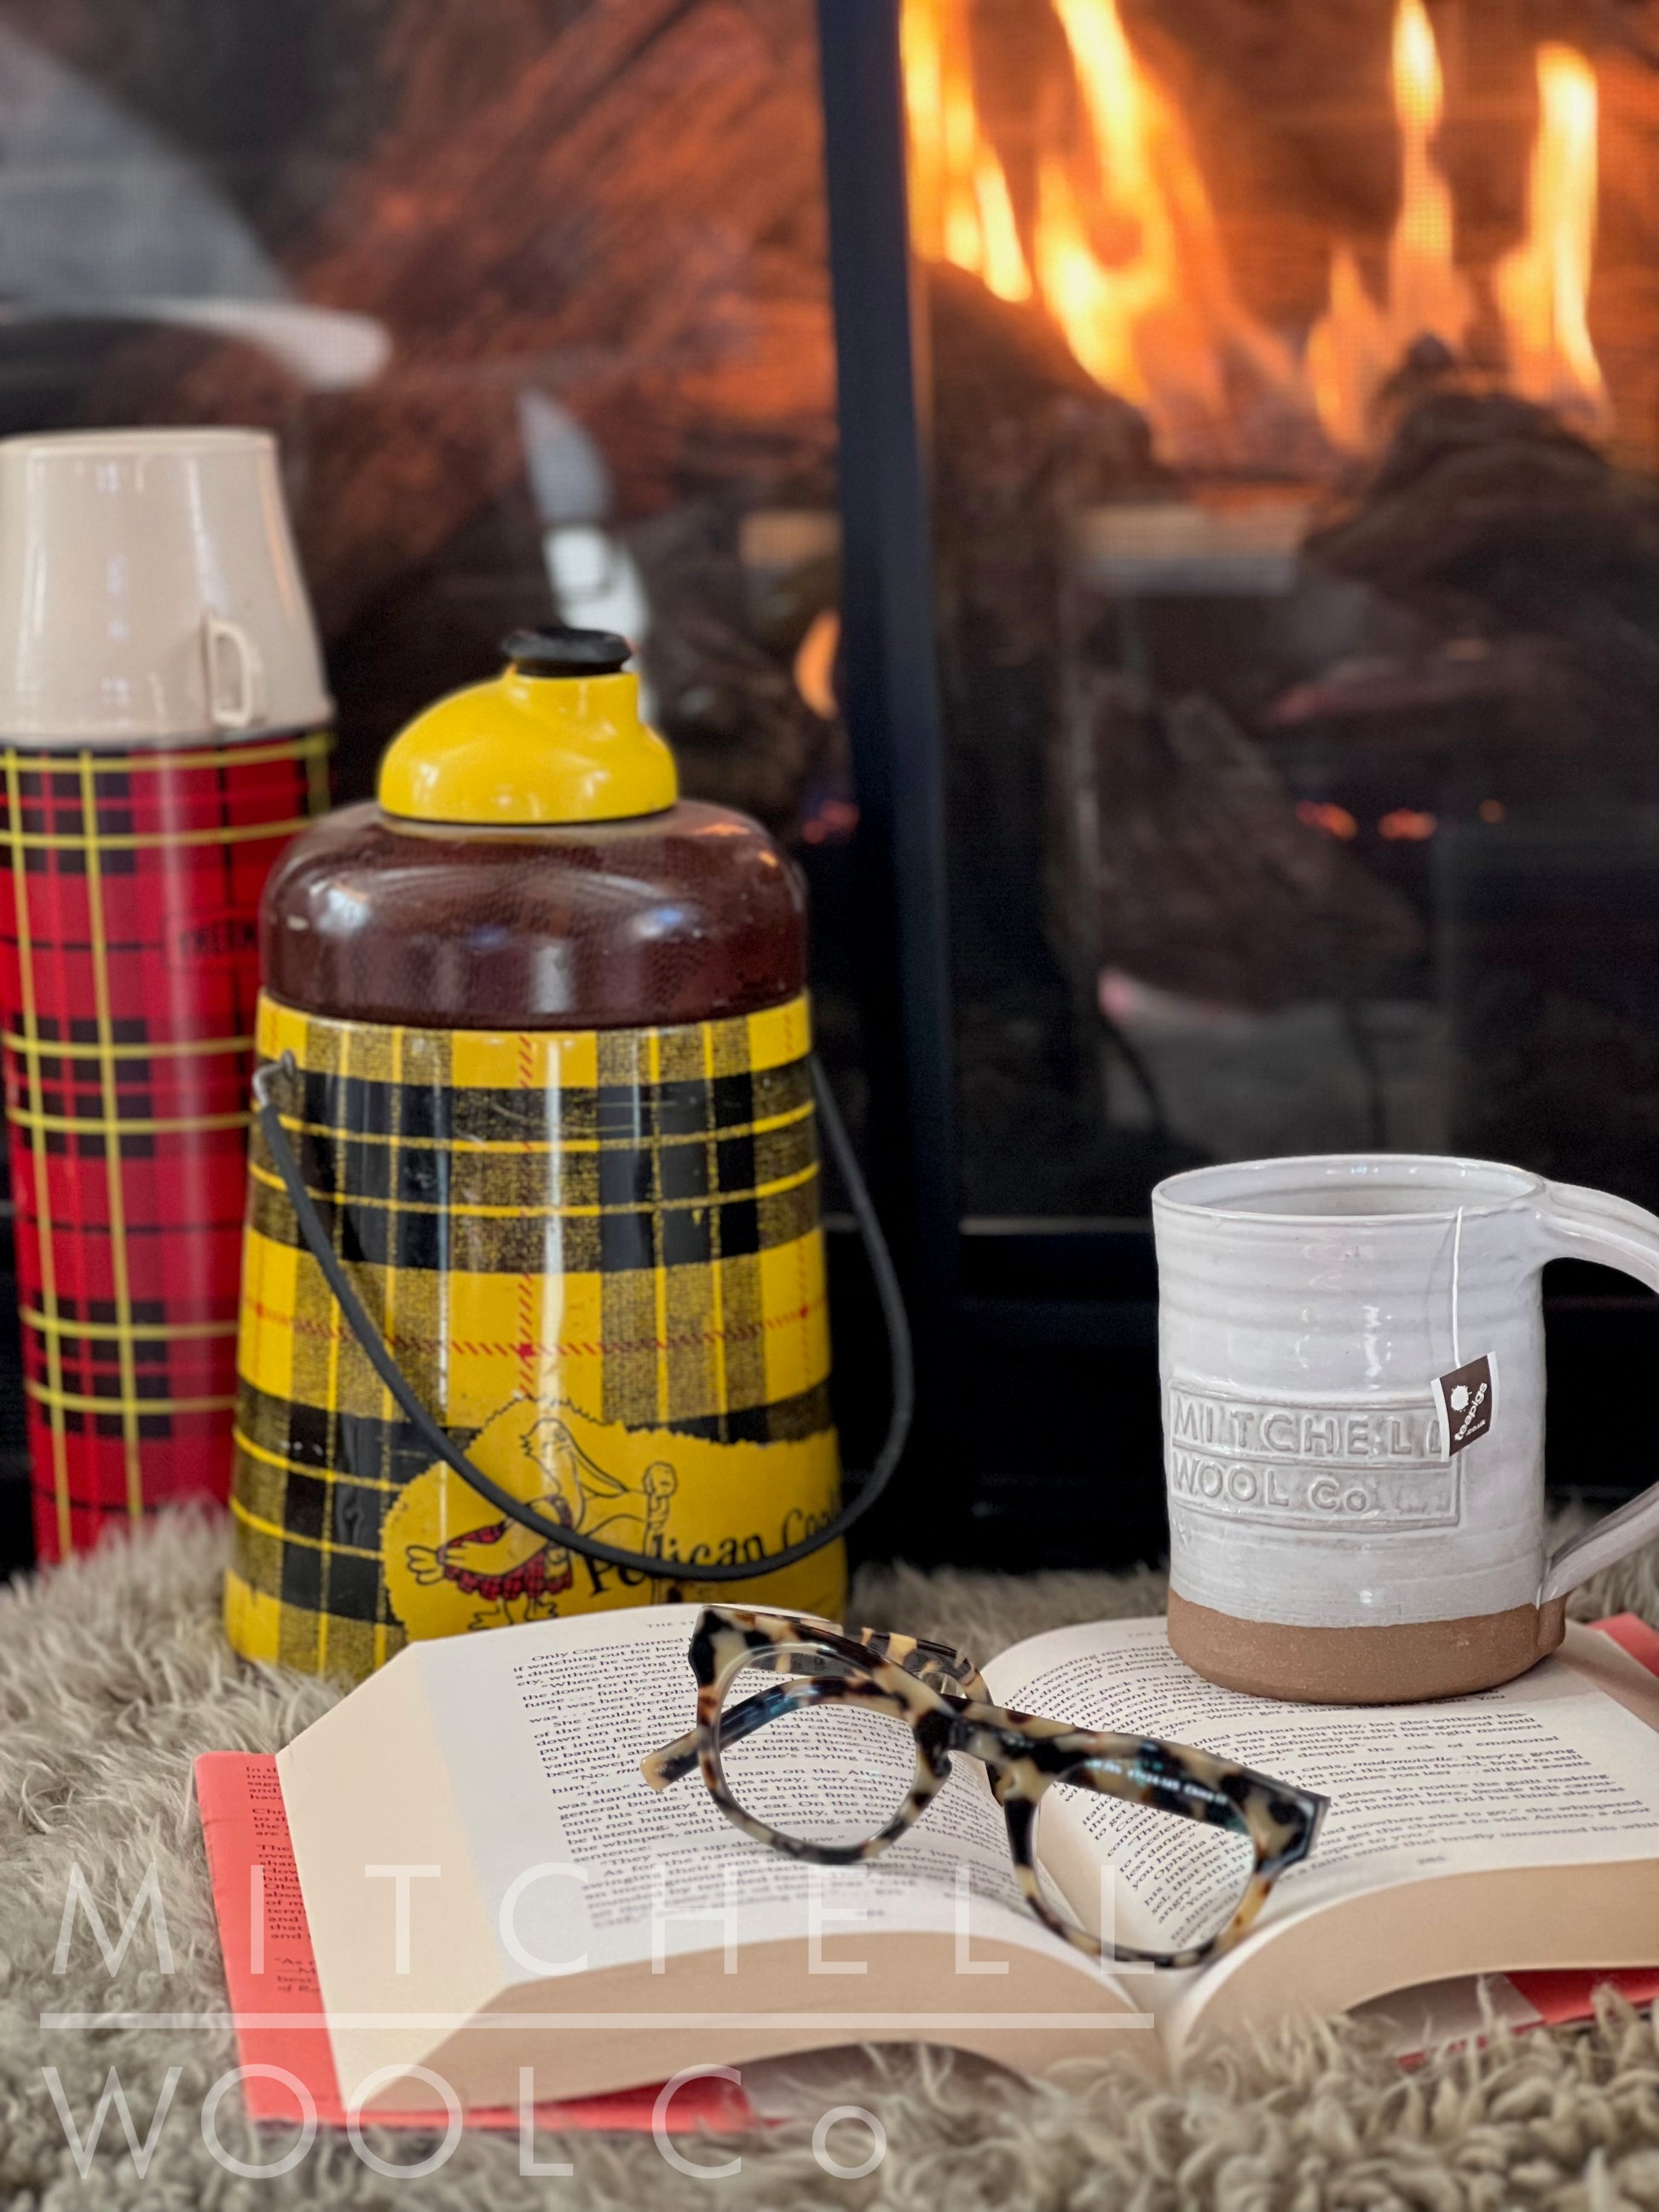 Cozy. Sherry's tossed reading glasses sit atop the book she left to grab more hot water to refill the cup of tea in our beautiful hand thrown coffee mug.